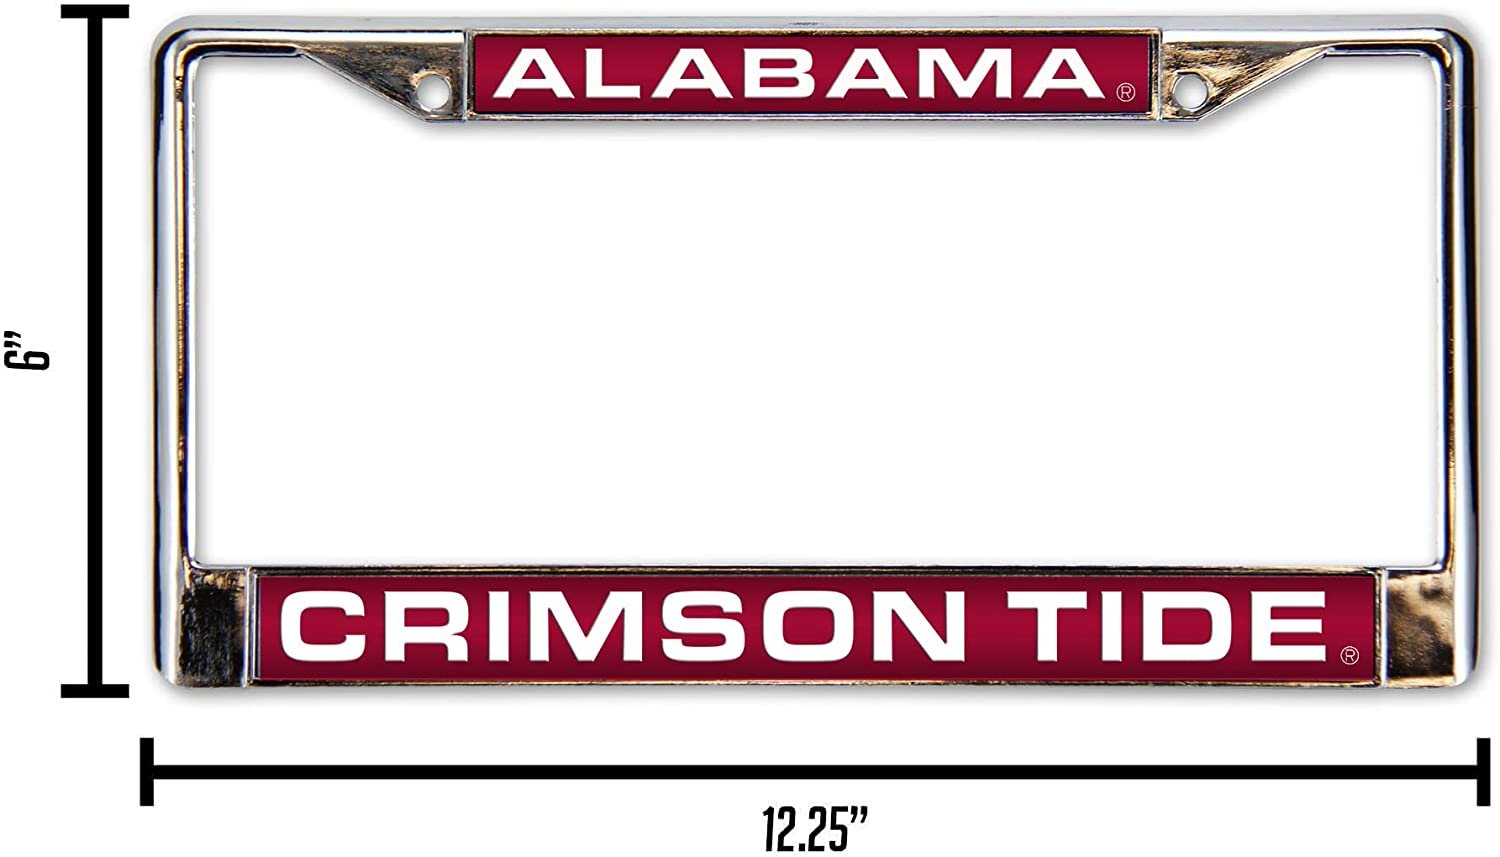 University of Alabama Crimson Tide Chrome Metal License Plate Frame Tag Cover, Laser Acrylic Mirrored Inserts, 12x6 Inch